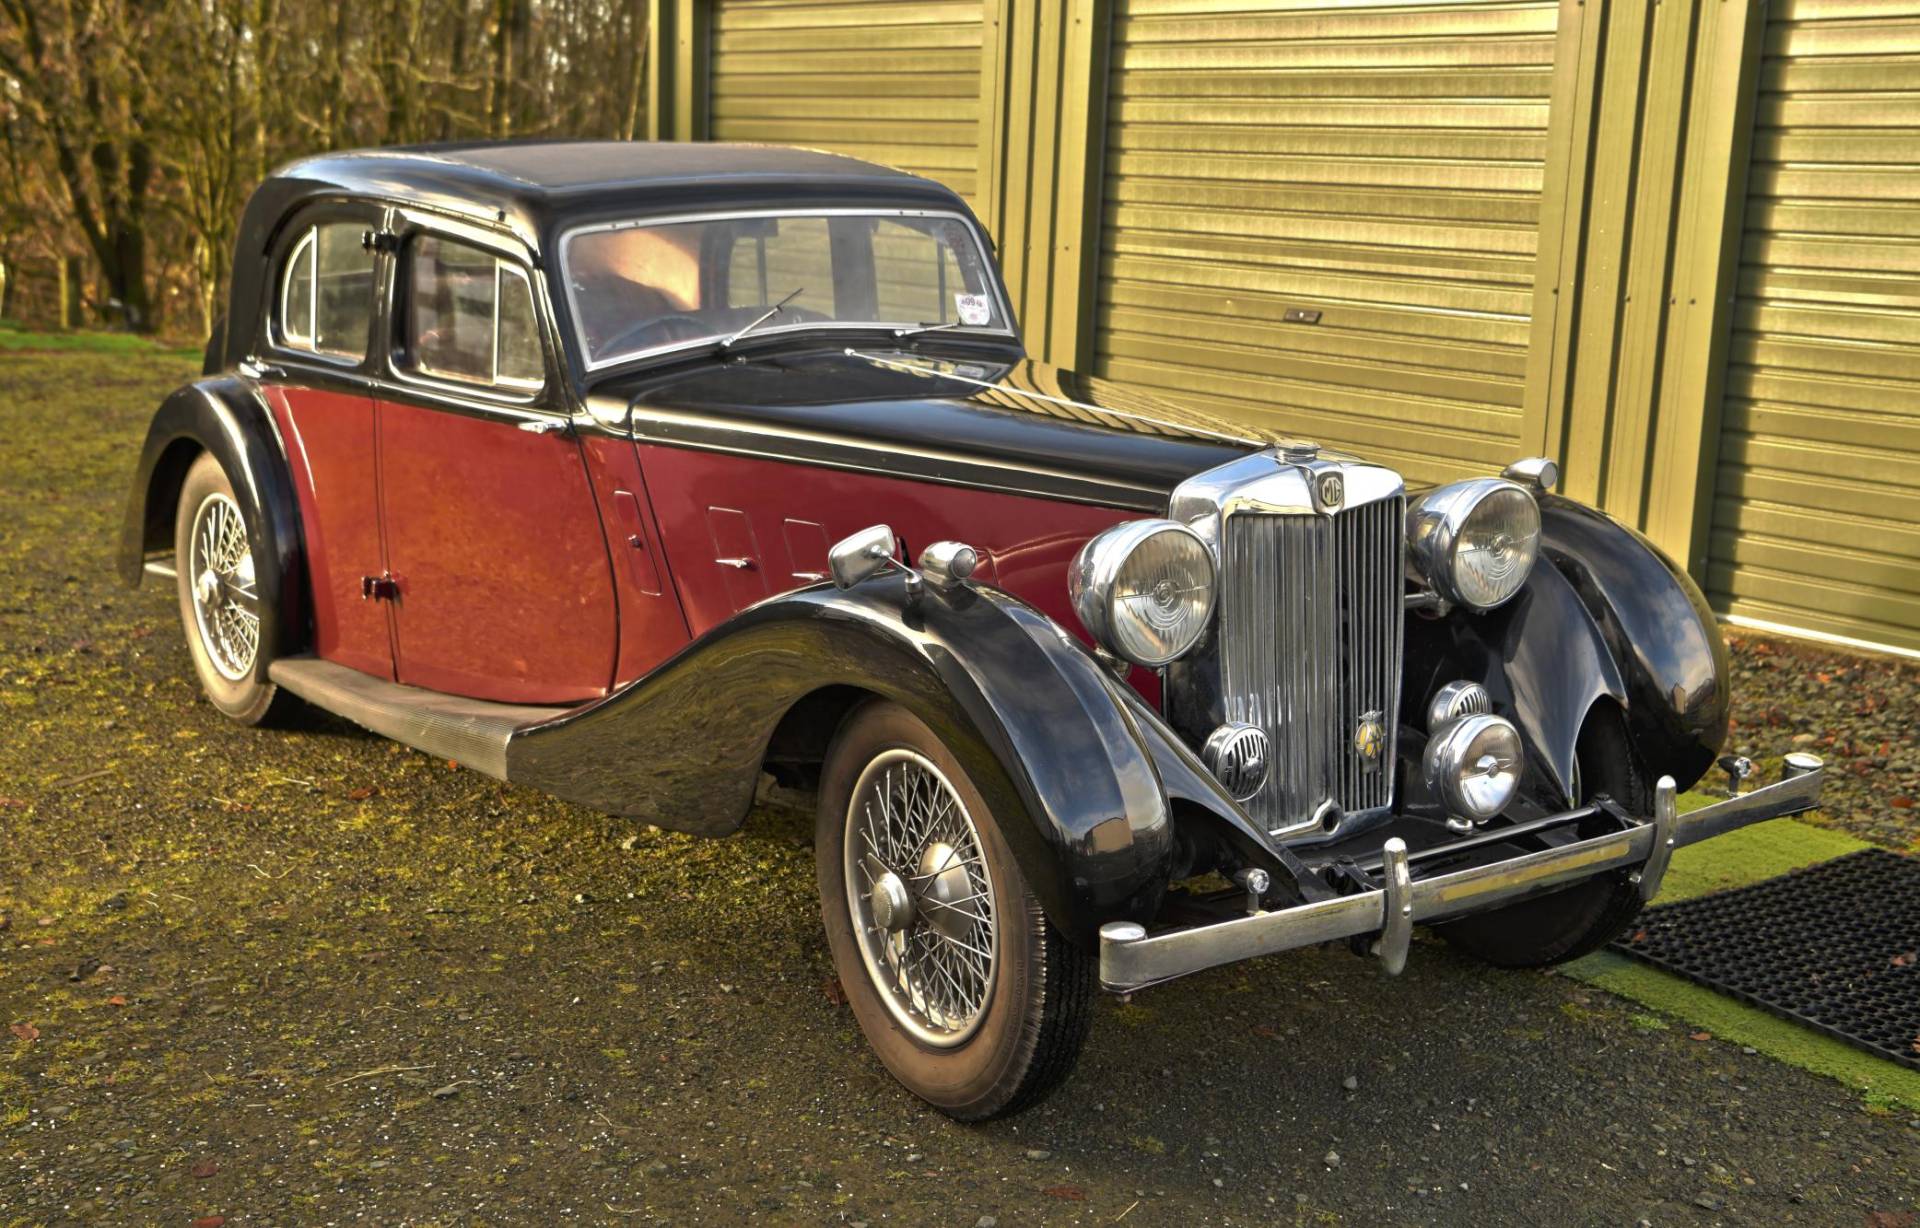 For Sale: MG SA (1900) offered for €40,874